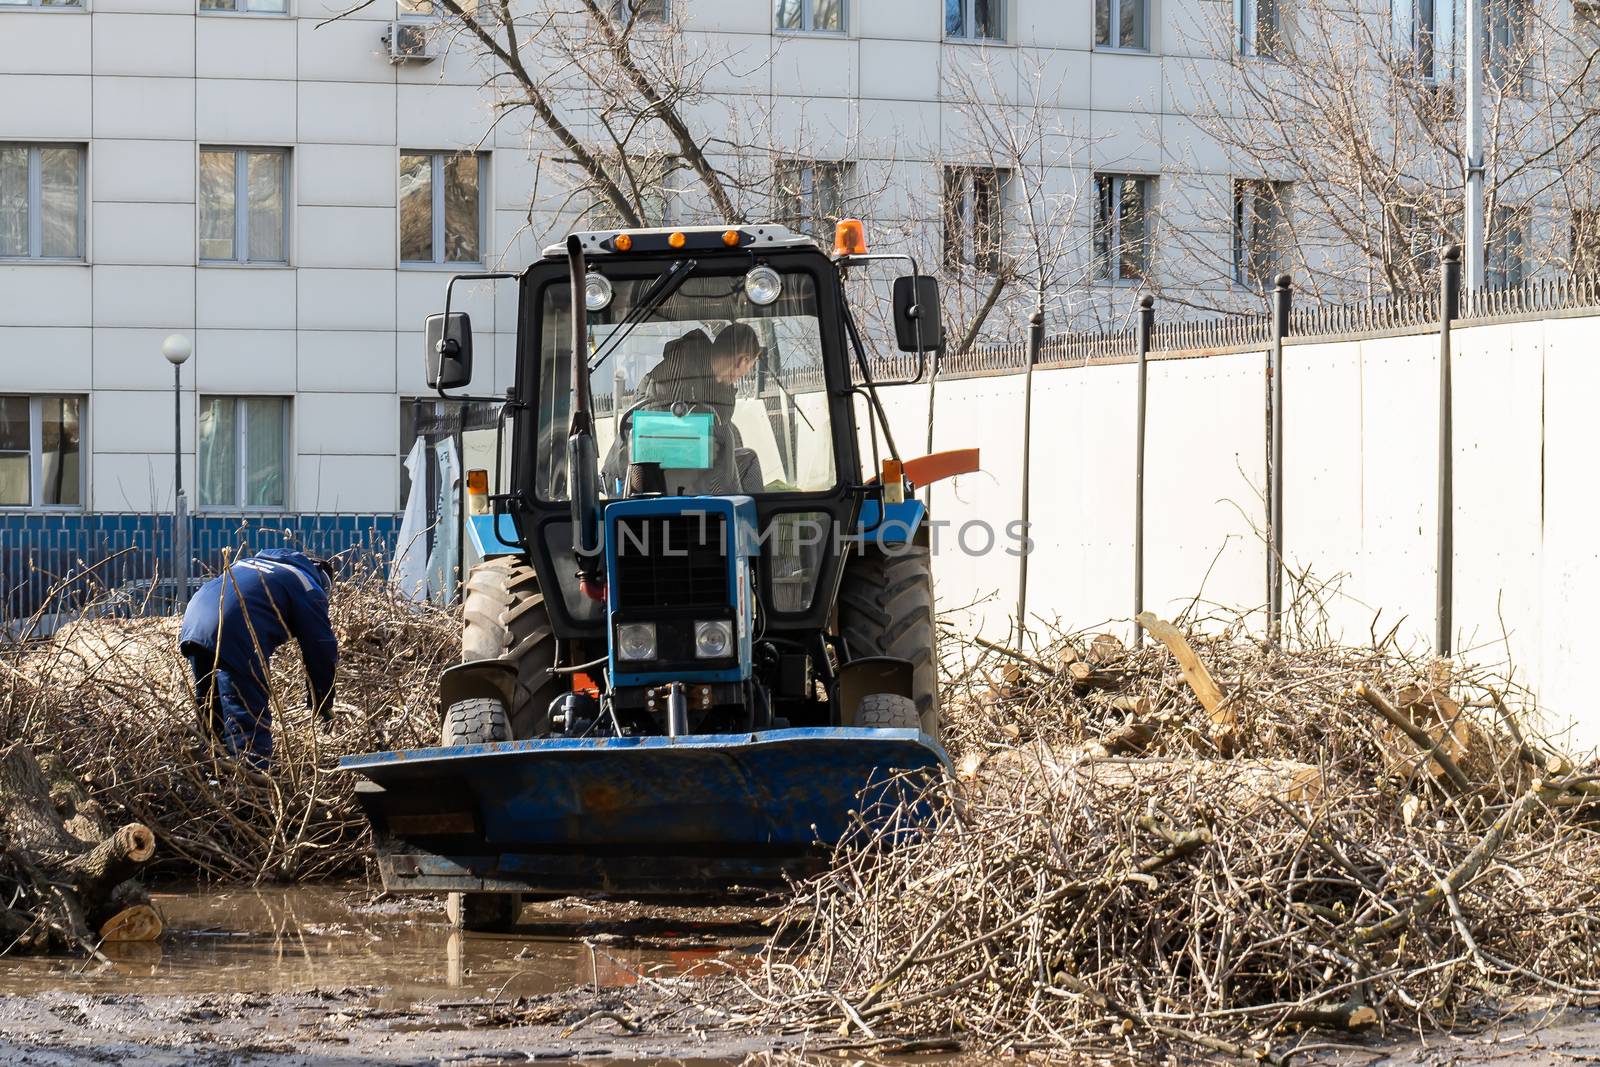 The city improvement service conducts spring cleaning of the city in Moscow. The tractor collects and disposes of cut tree branches. The worker got out of the car.